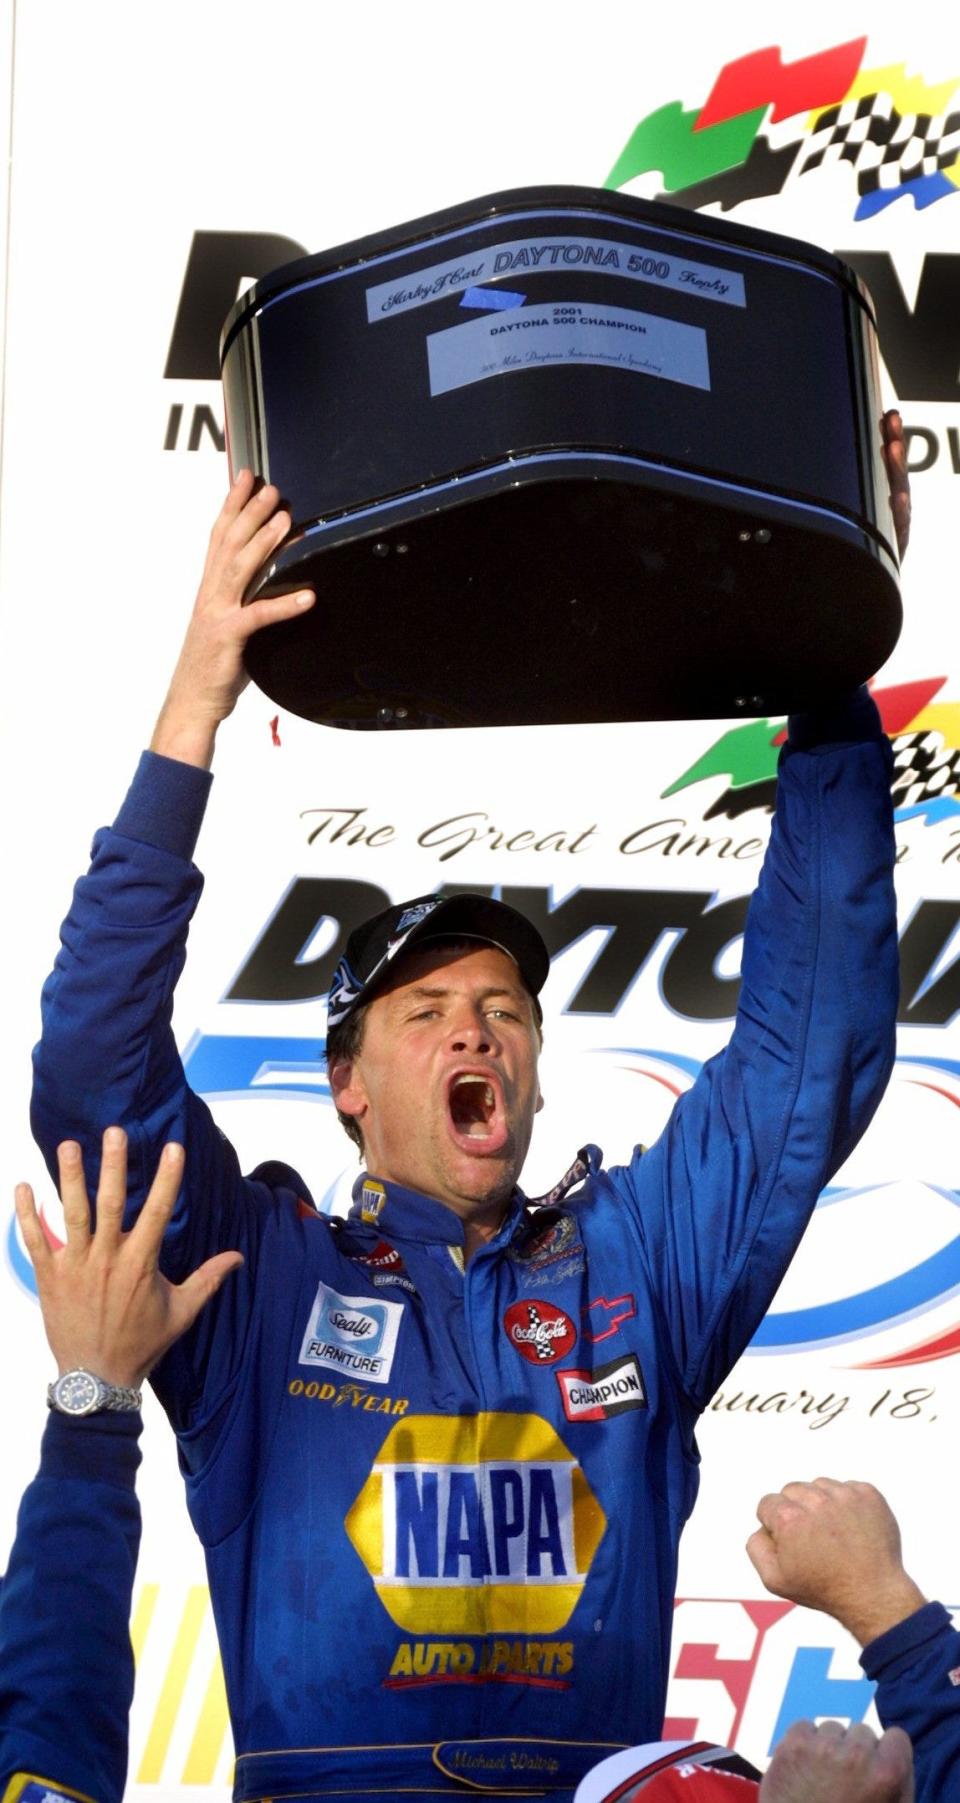 Michael Waltrip lifts the champion's trophy after winning the 2001 edition of the Daytona 500. On Monday, Feb. 12, Waltrip will be a guest bartender at Daytona Beach International Airport. It's an event to announce that brews from the Michael Waltrip Brewing company are now being sold at the airport.